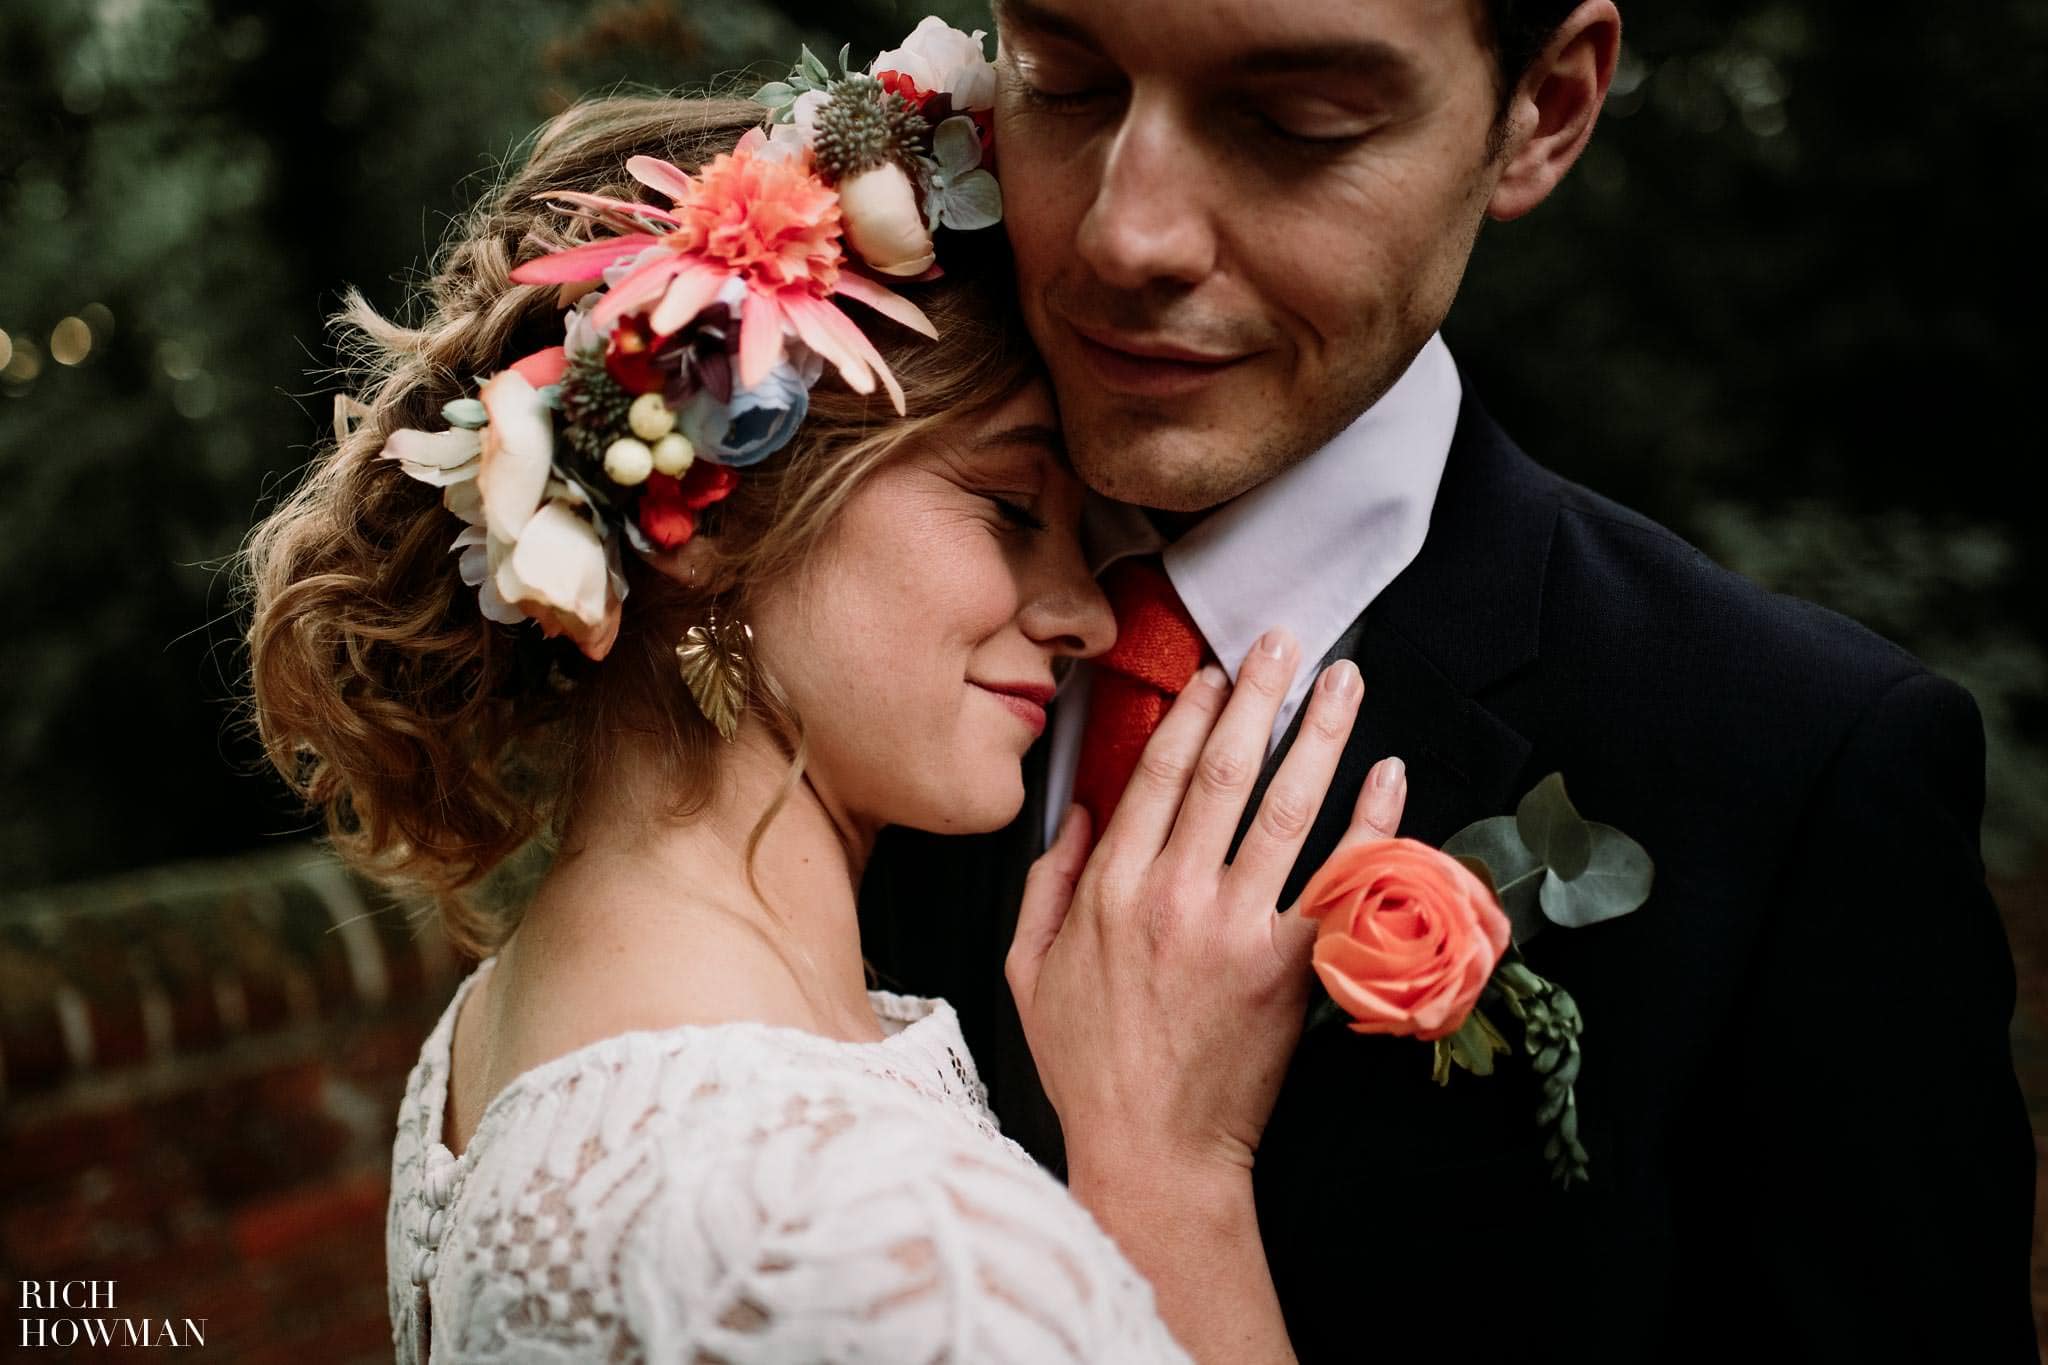 Boho Wedding Photographer for a wedding in the woods. Bride and Groom snuggle up for wedding photos